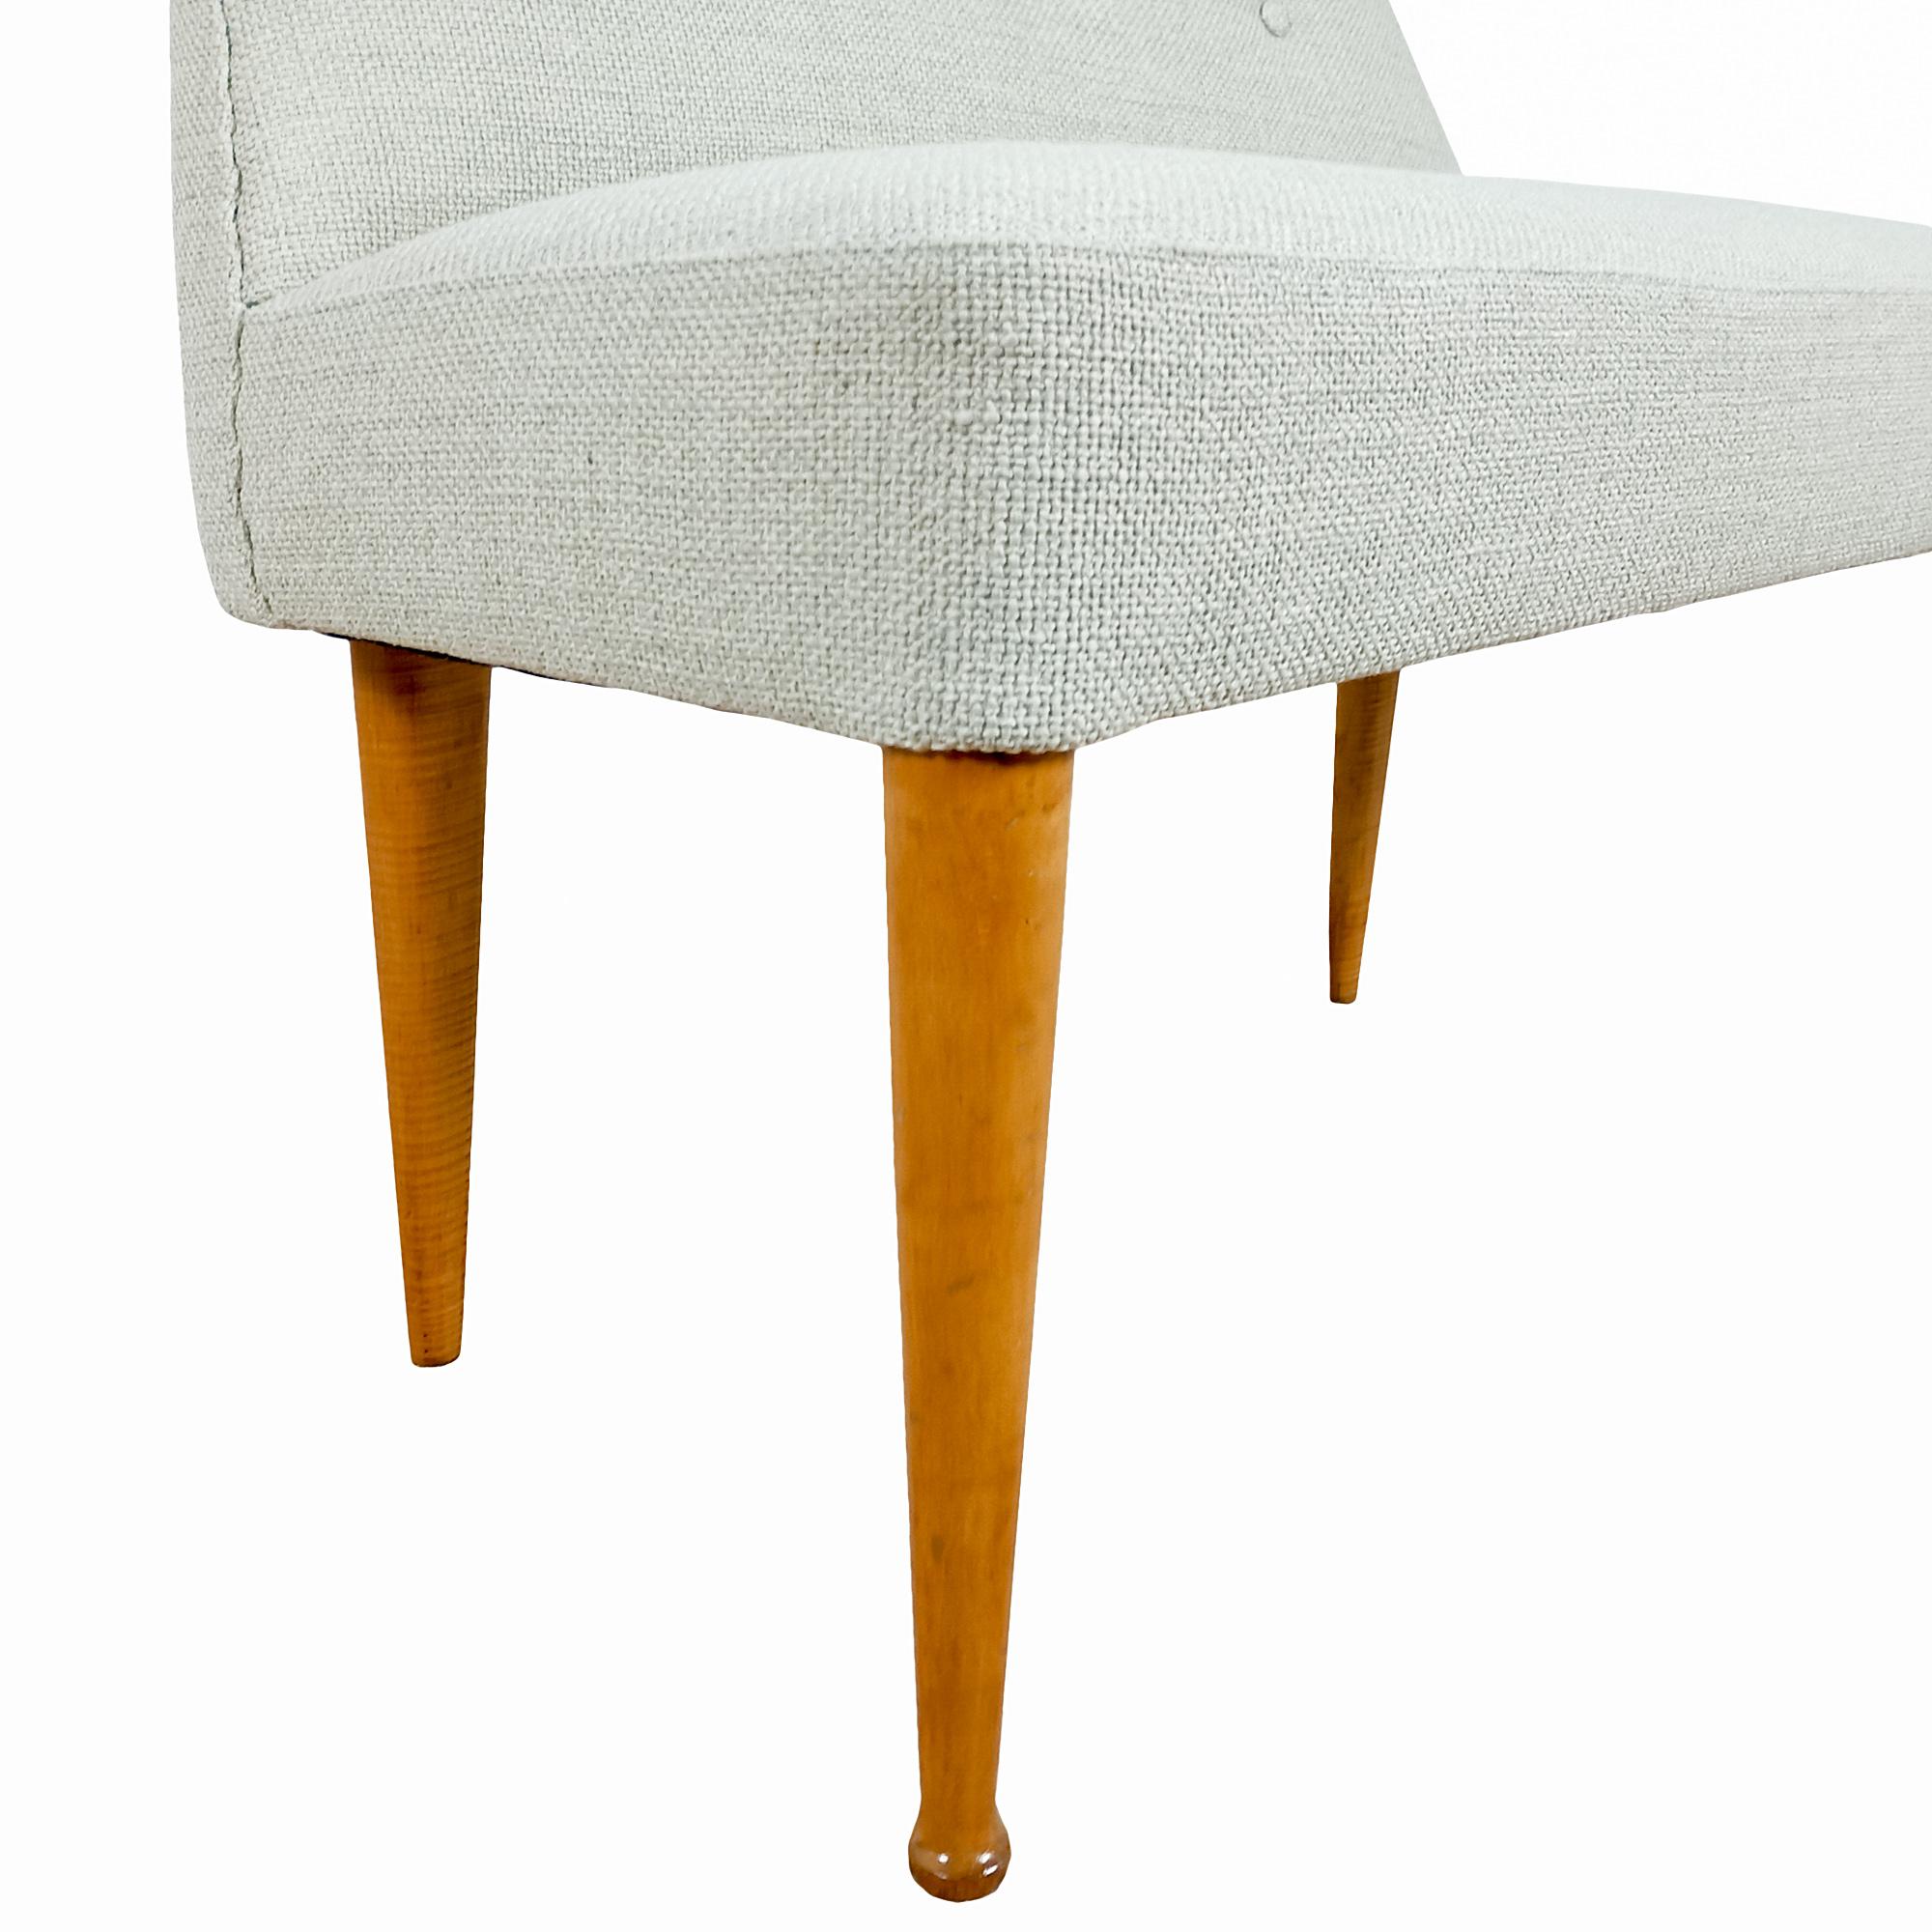 Small MId-Century Modern Bench in Greige Chenille Fabric - Italy, Early 1950s For Sale 2